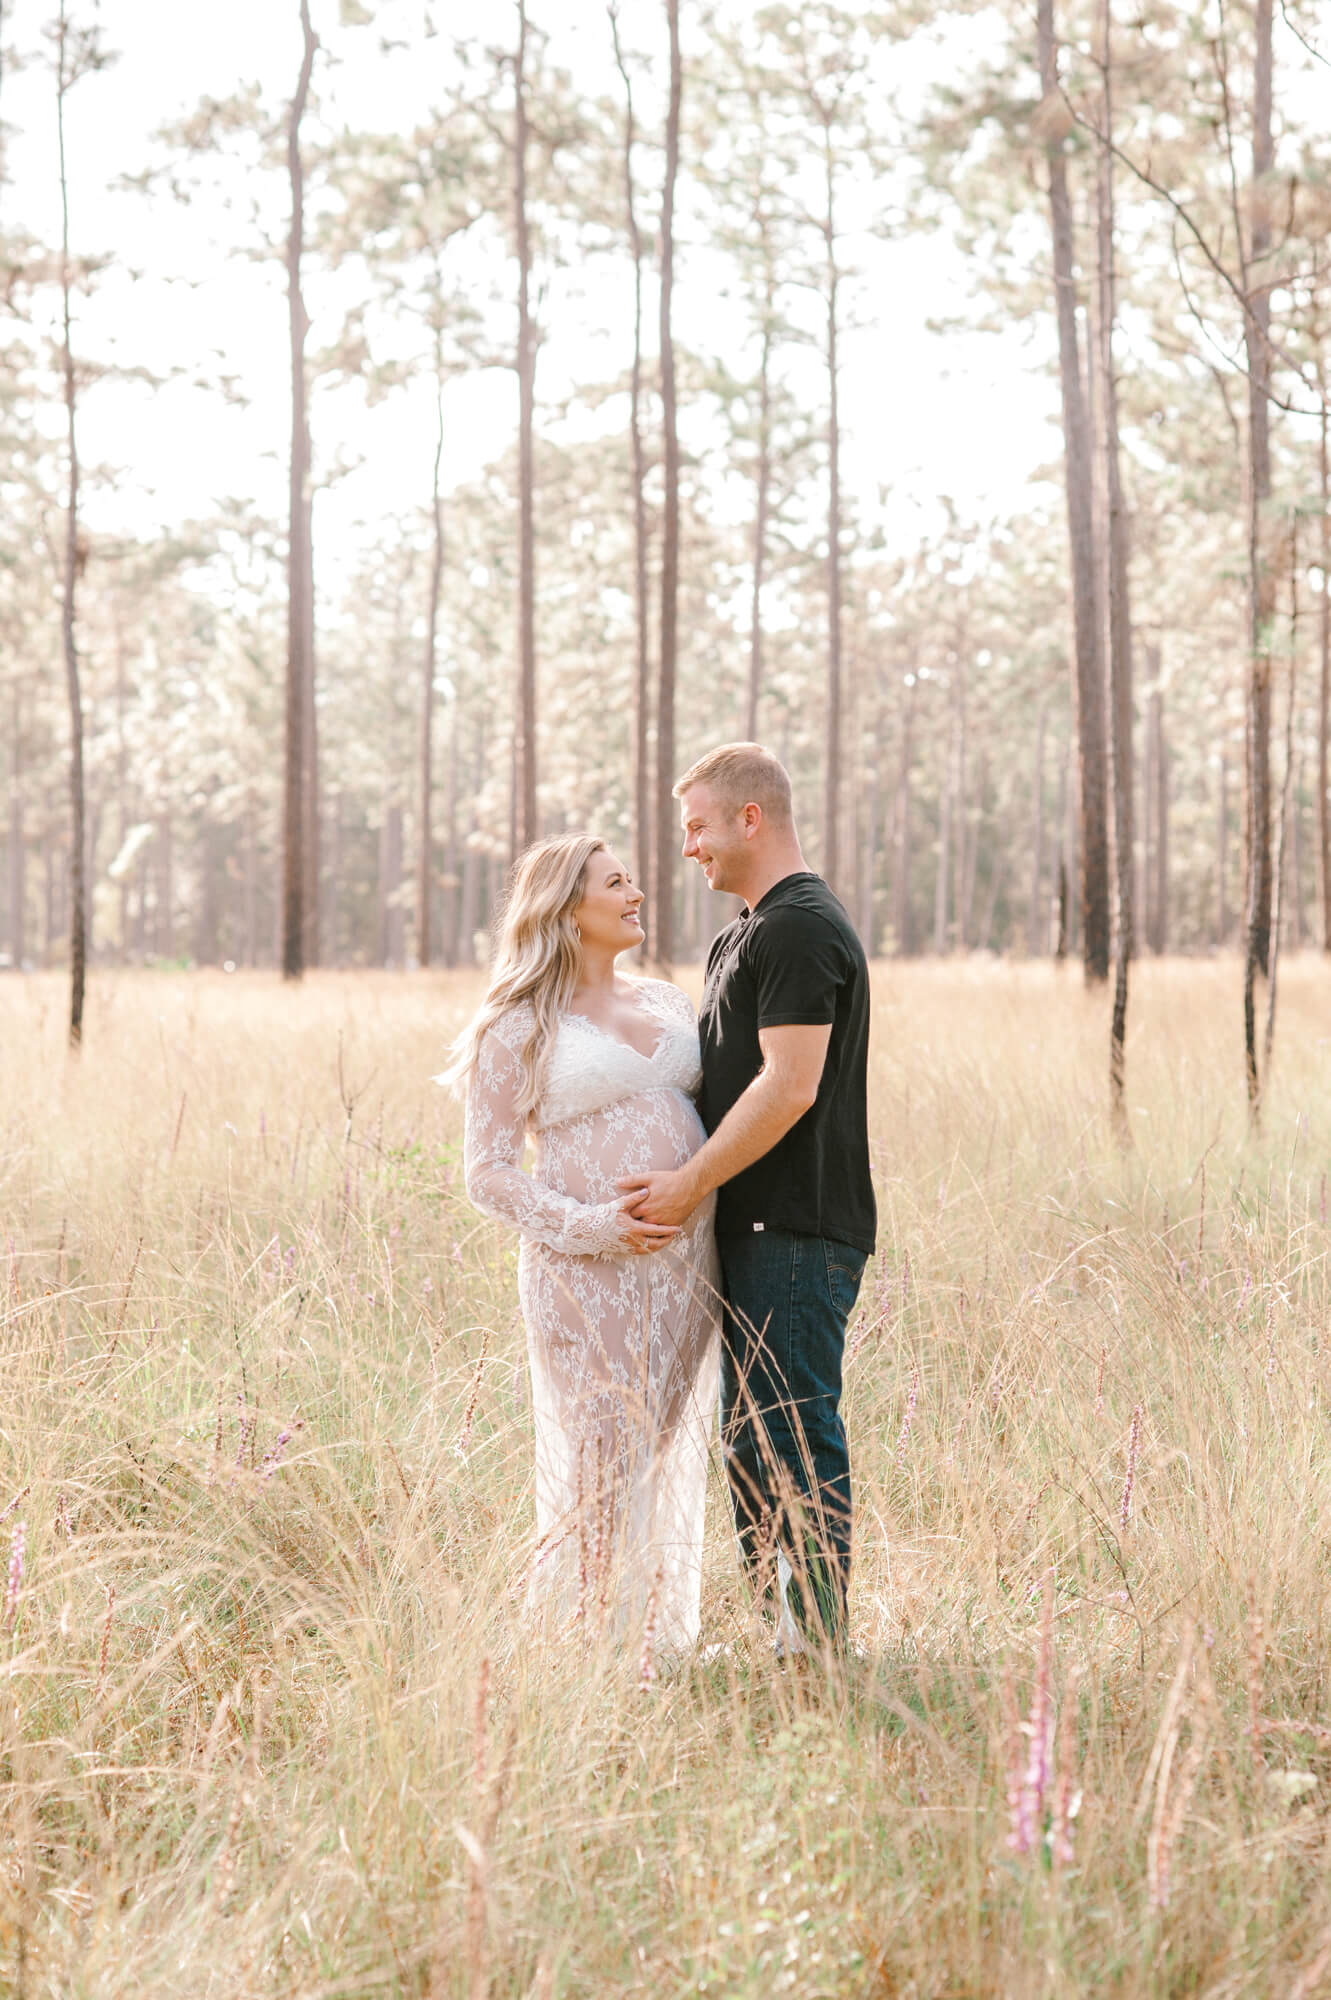 Couple stands in a field of tall grass surrounded by trees holding the moms belly thinking about their new daughter.